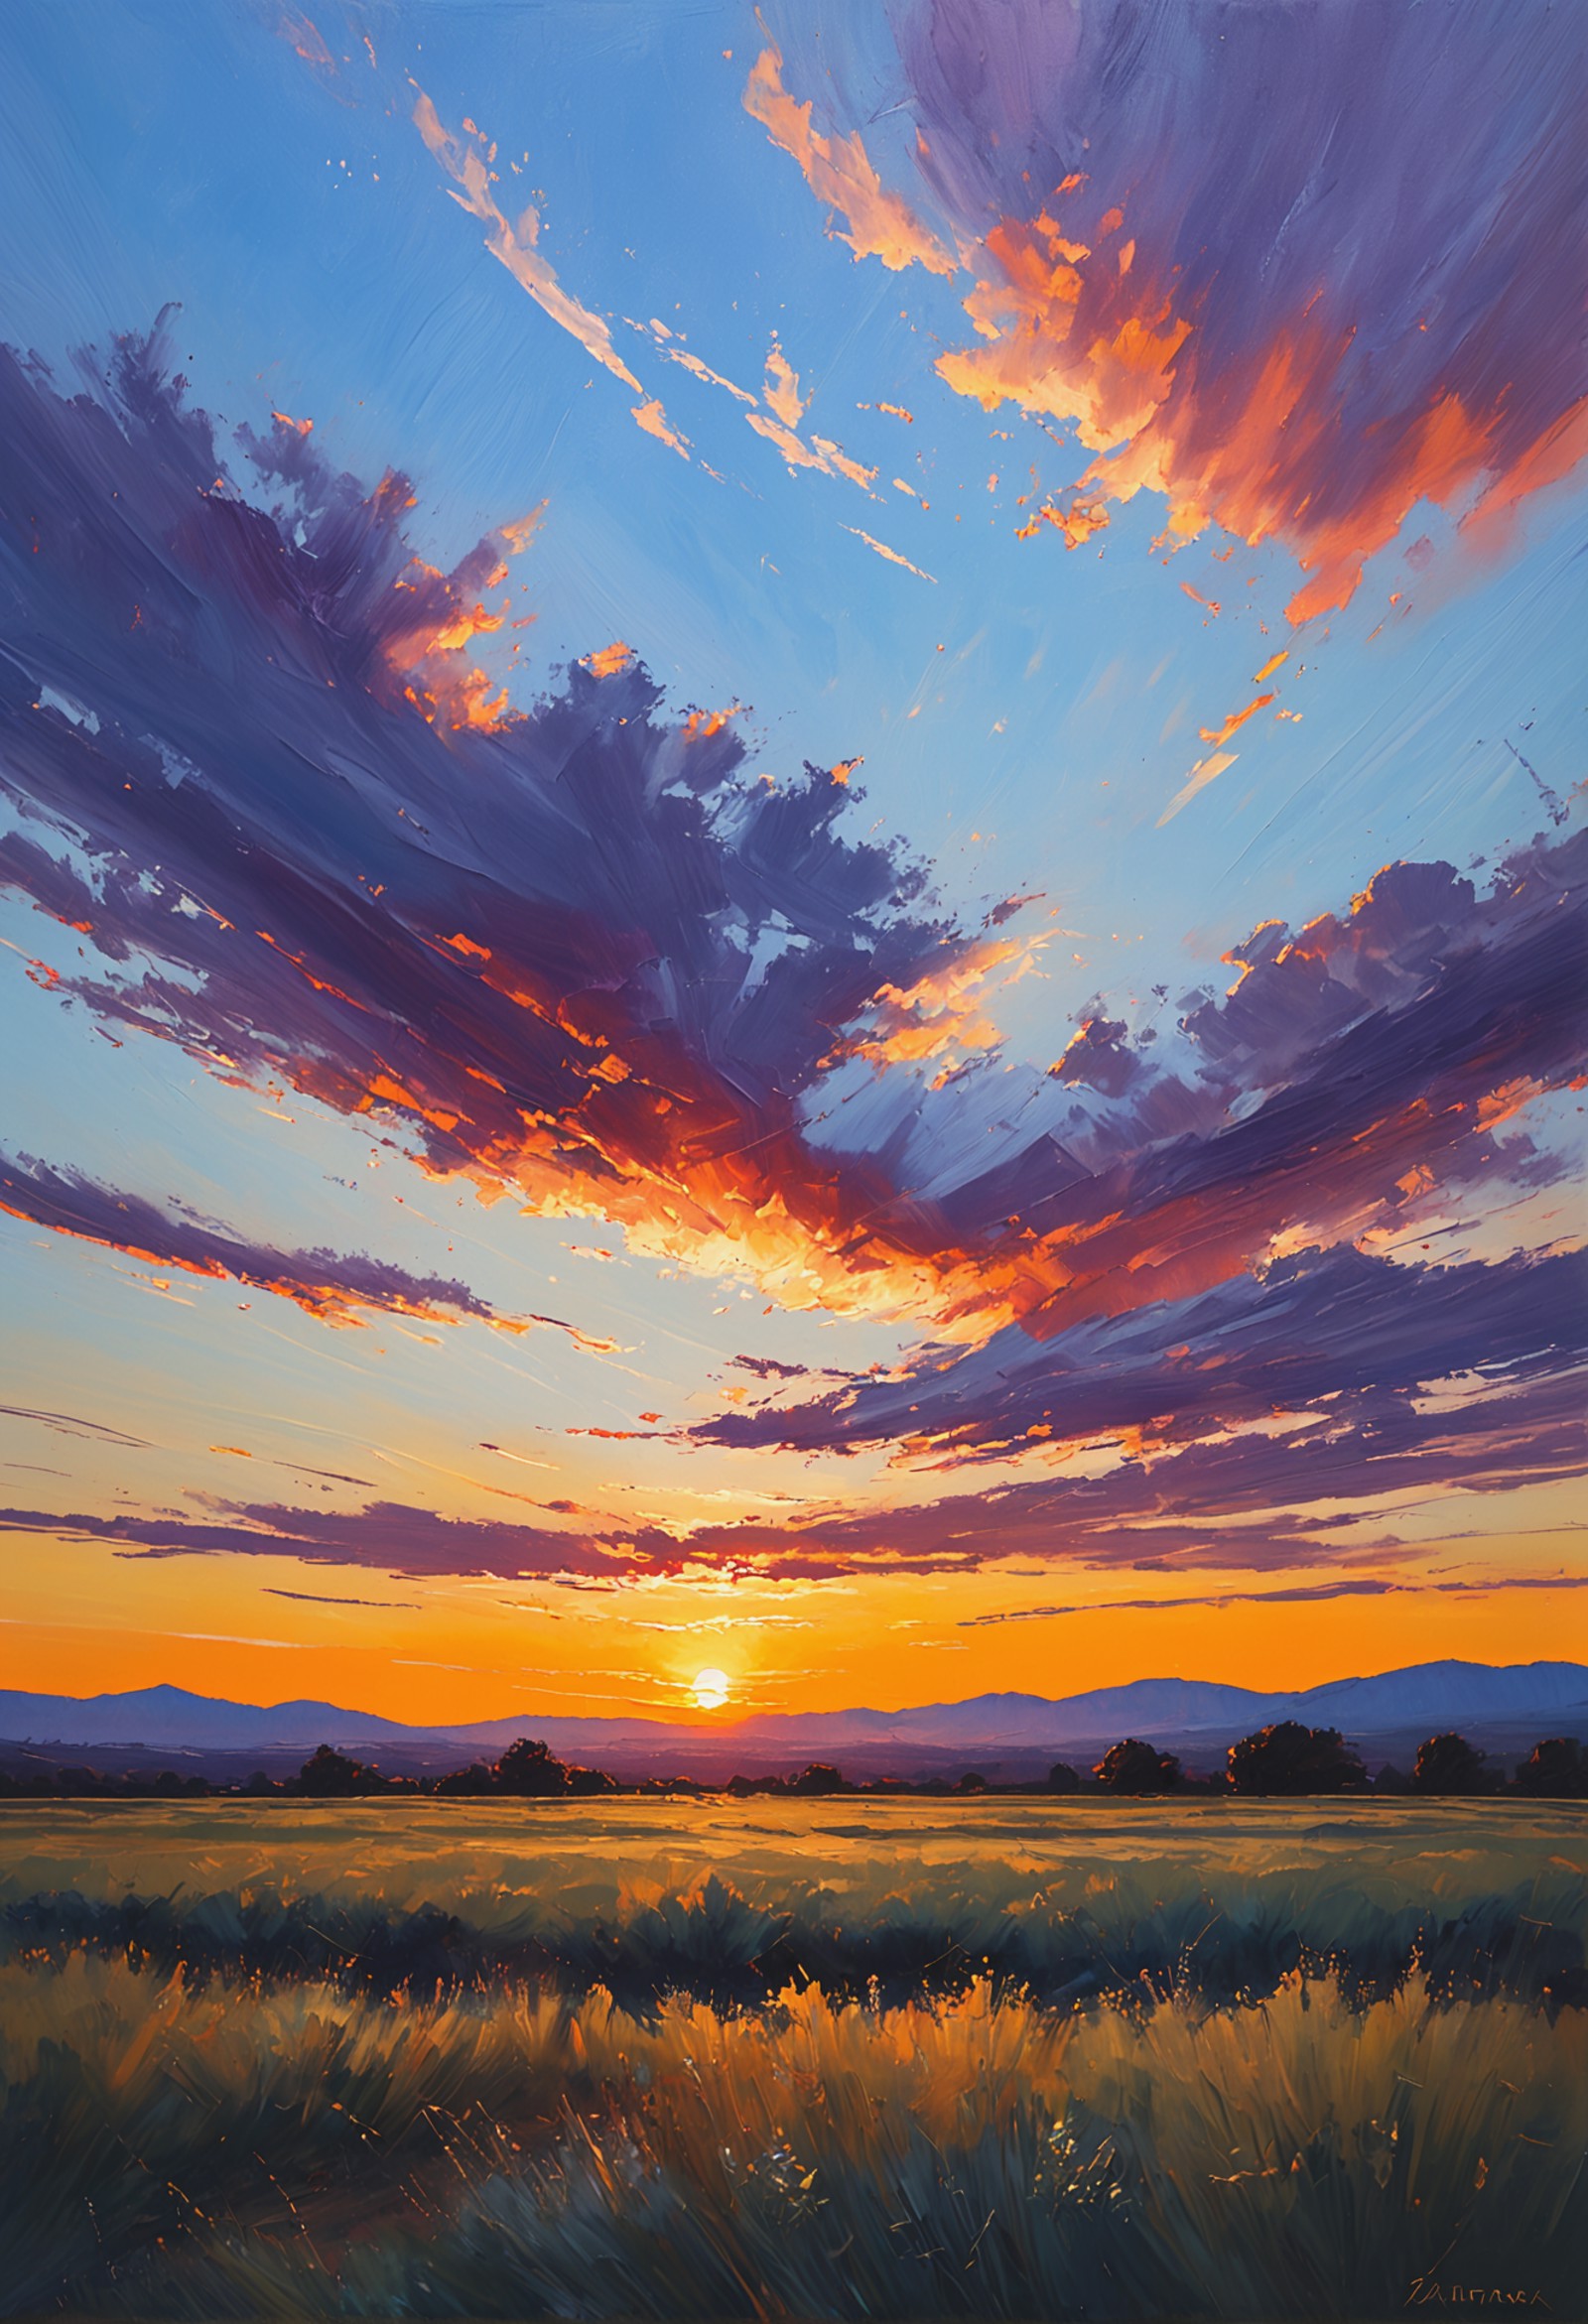 A dazzling sunset with a dynamic sky painted in shades of purple, orange, and blue. The sun is low on the horizon, casting a warm glow over the silhouetted hills in the distance and a field of tall grasses in the foreground. The clouds are illuminated by the setting sun, creating an impression of depth and movement in the sky. 